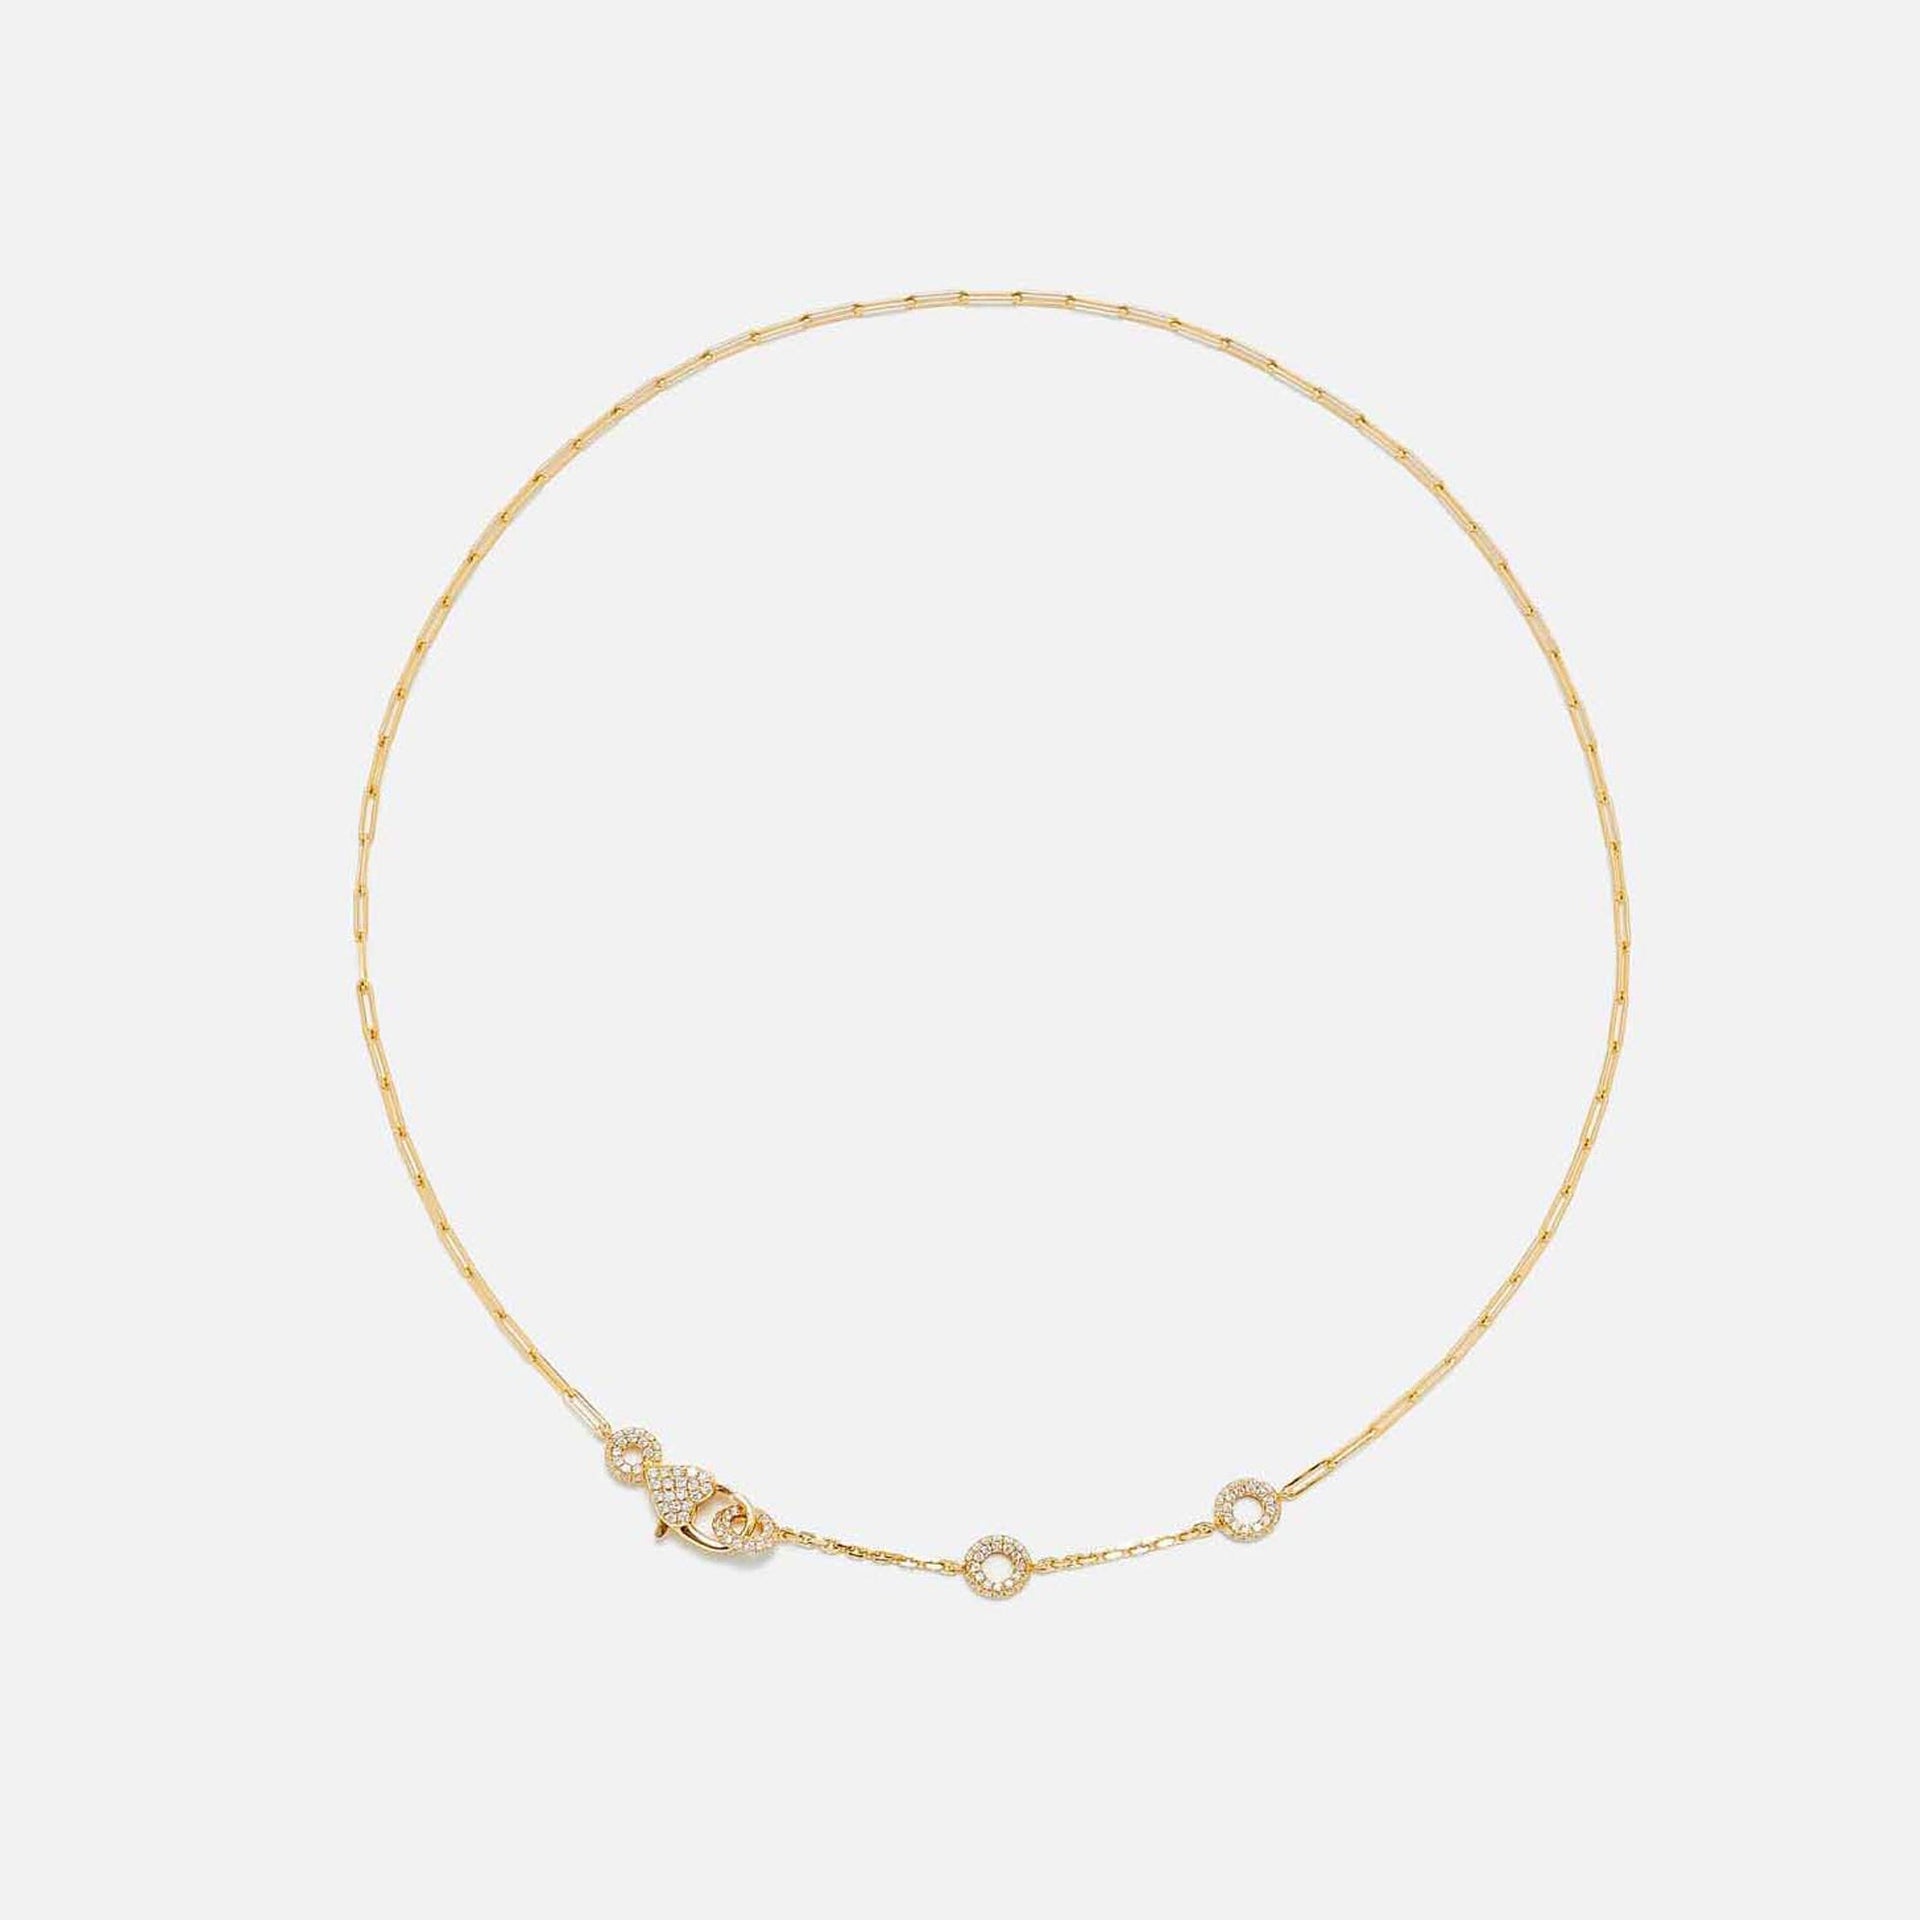 Yvonne Leon Solitaire Donut Necklace in 18K Yellow Gold -  Yellow Gold